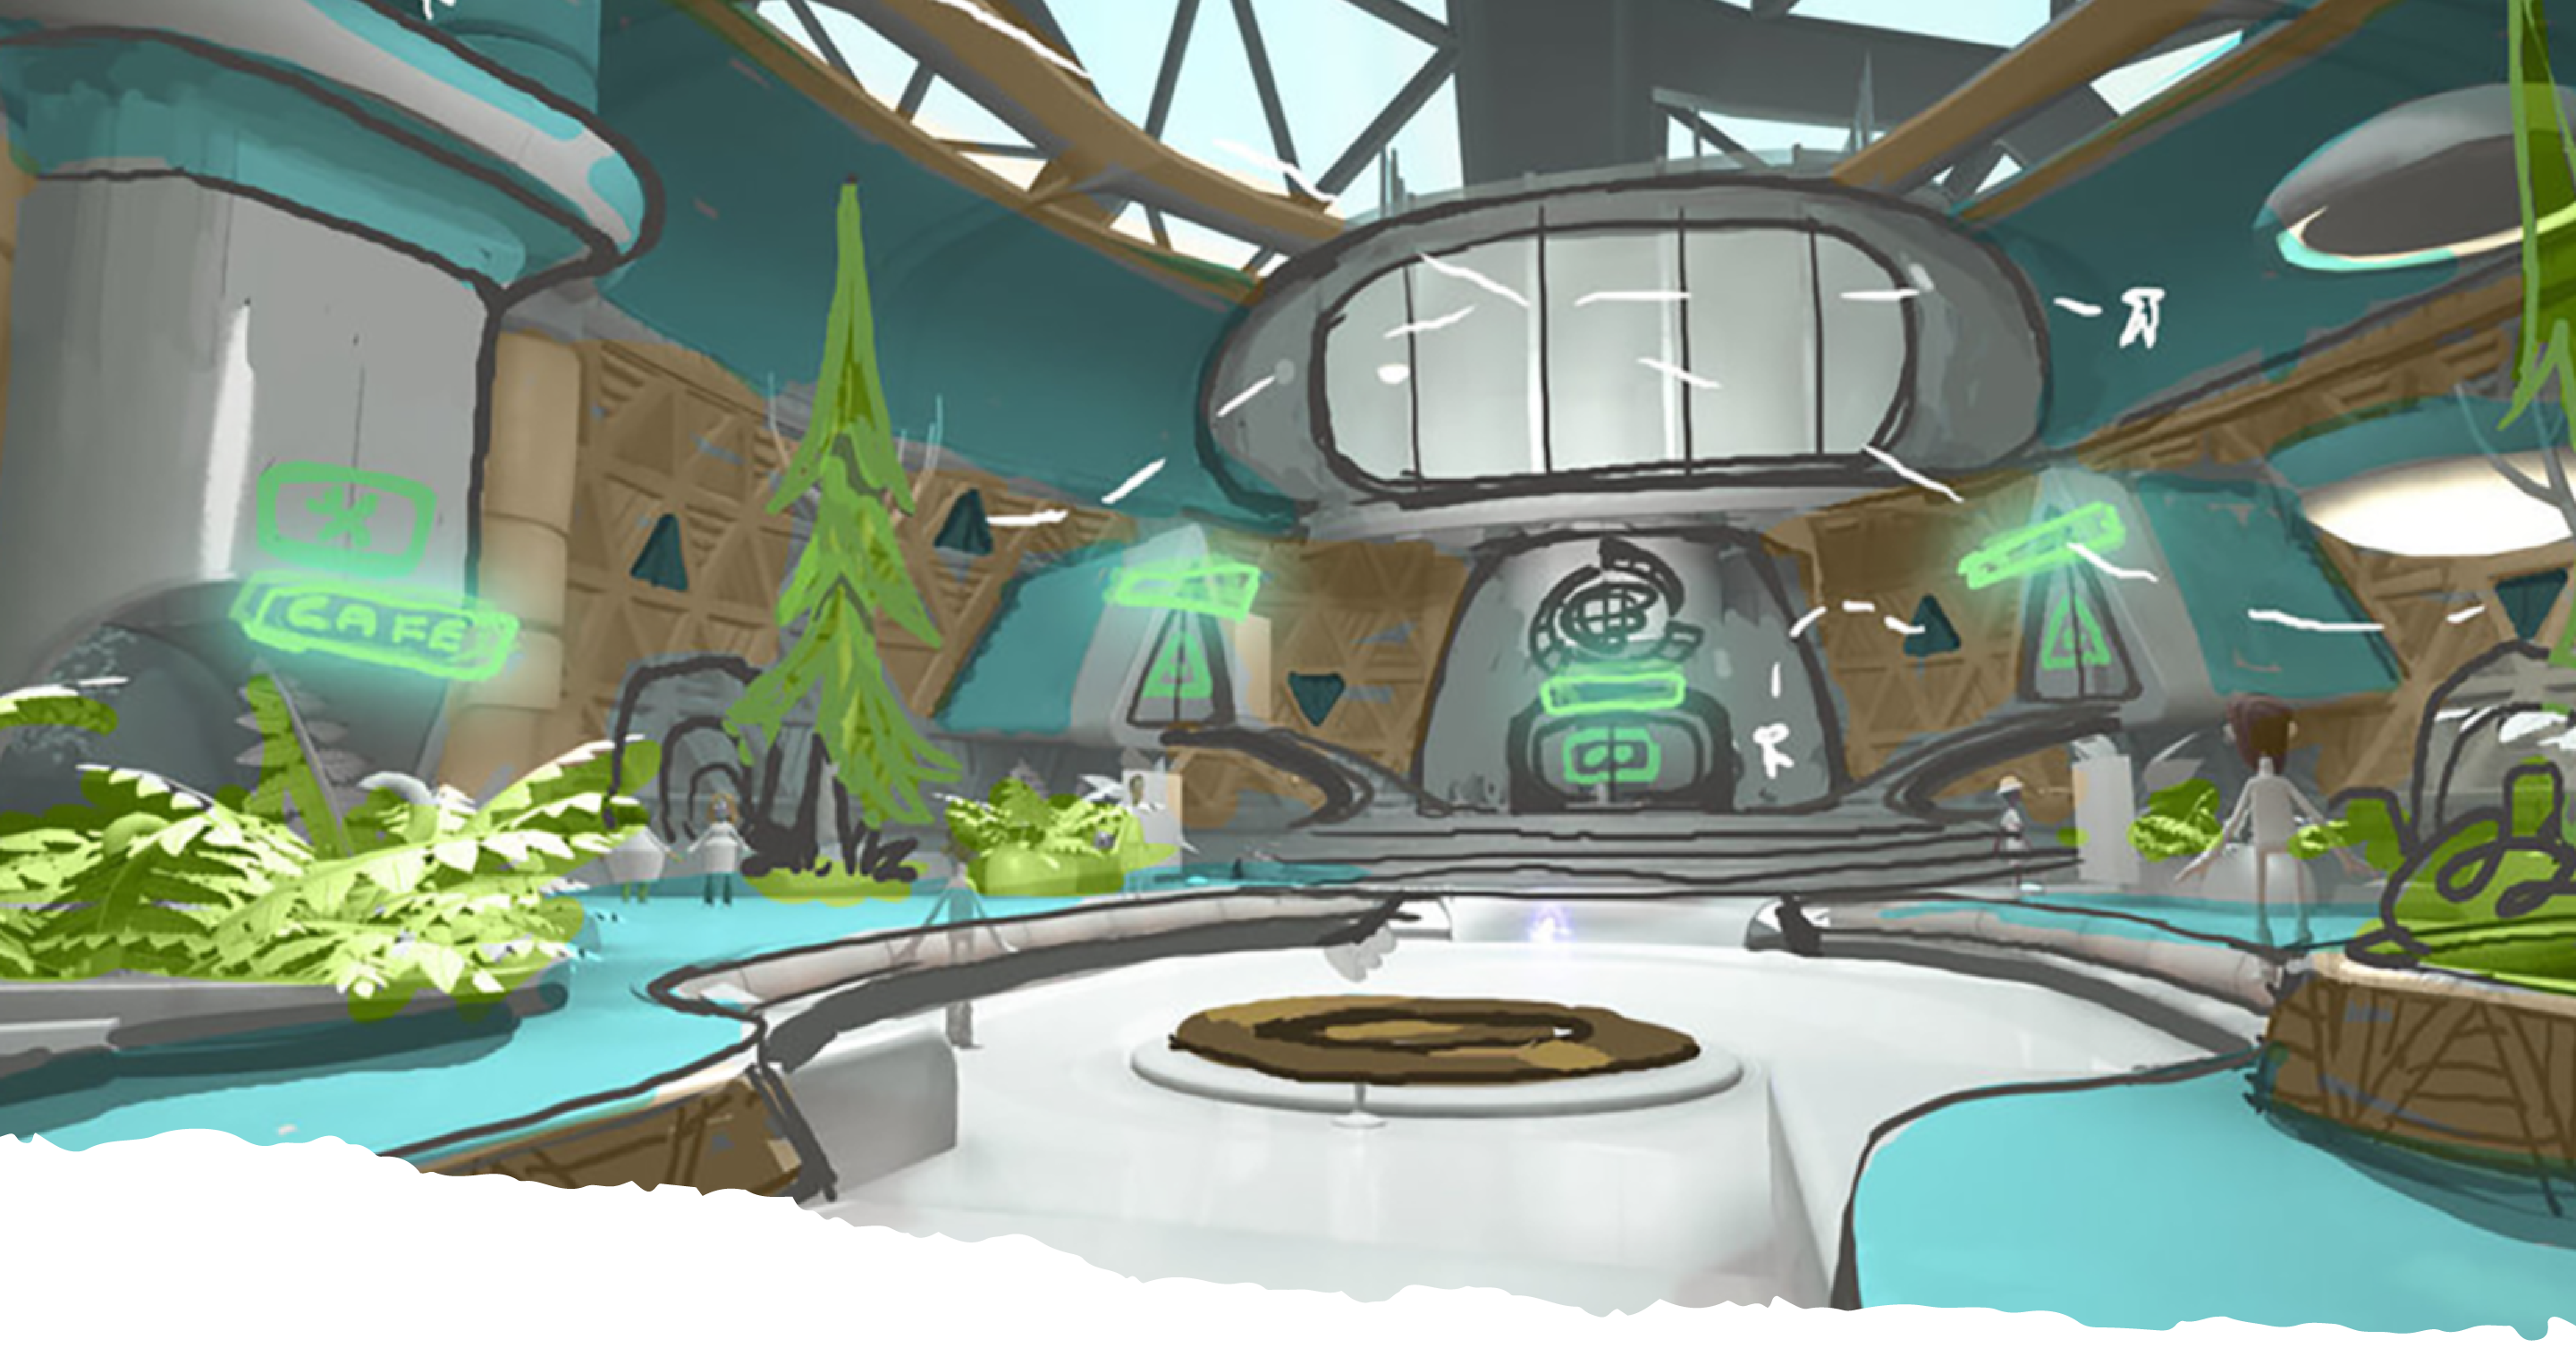 <b class="accent">FIG. 4 — </b> Early concept art by Levi Ryken, Geoff Soulis, Lisette Titre-Montgomery, and Nathan "Bagel" Stapley on the Psychonauts 2 creative team, provided to Lettermatic as inspiration.